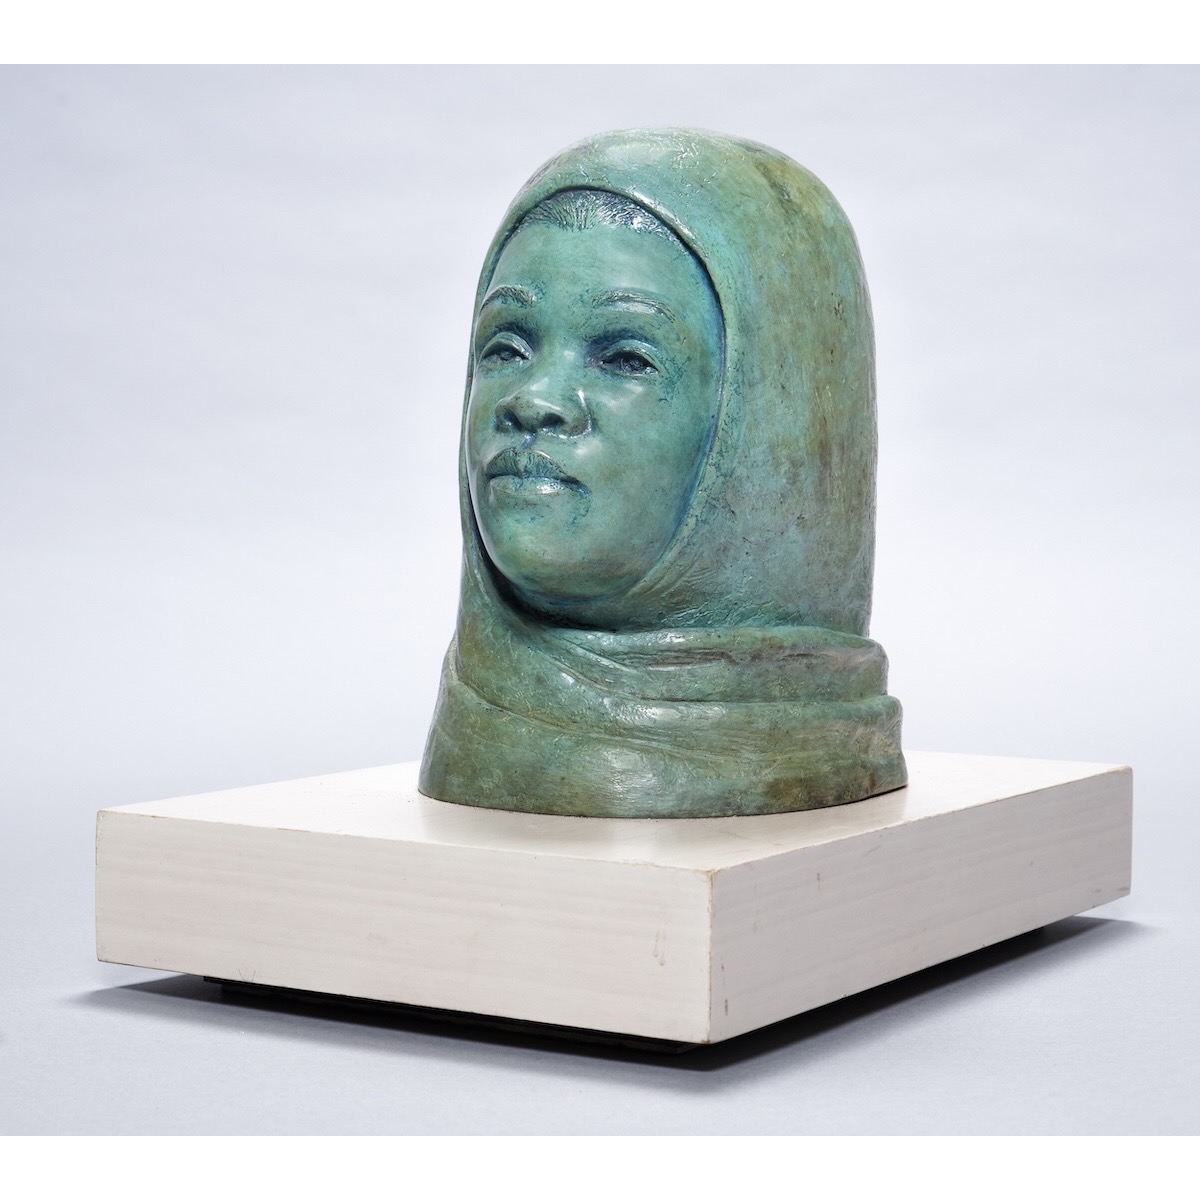 Image of a bronze sculpture of a young woman in a head wrap by the artist Otto Neals